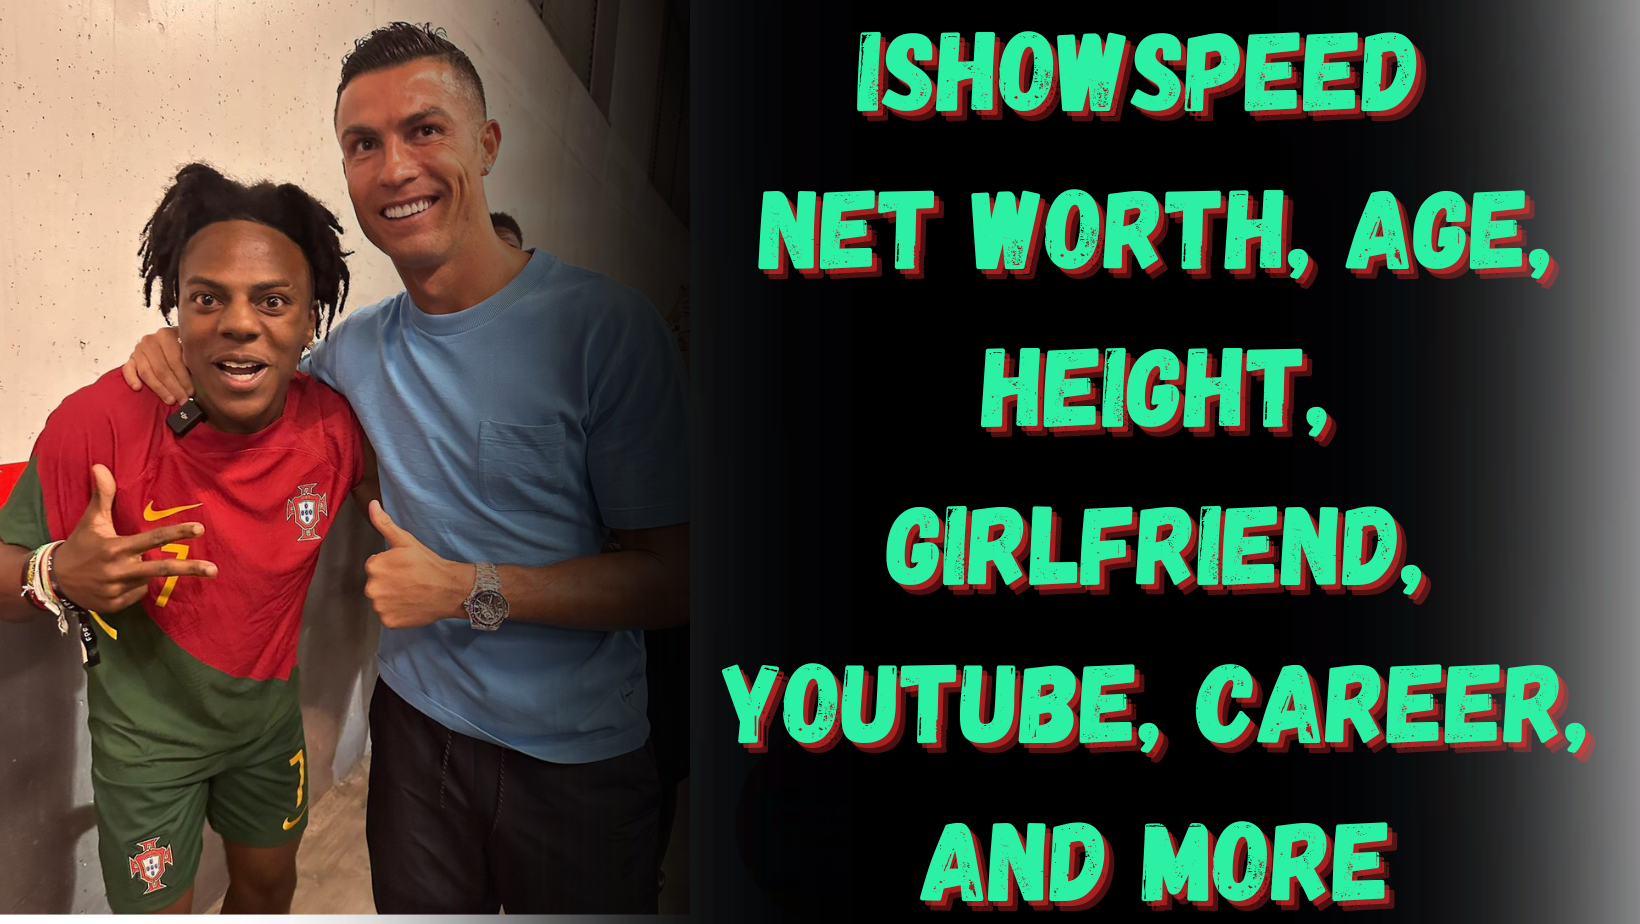 Ishowspeed Biography: Wikipedia, Real Name, Age, Height, Wife, Net Worth